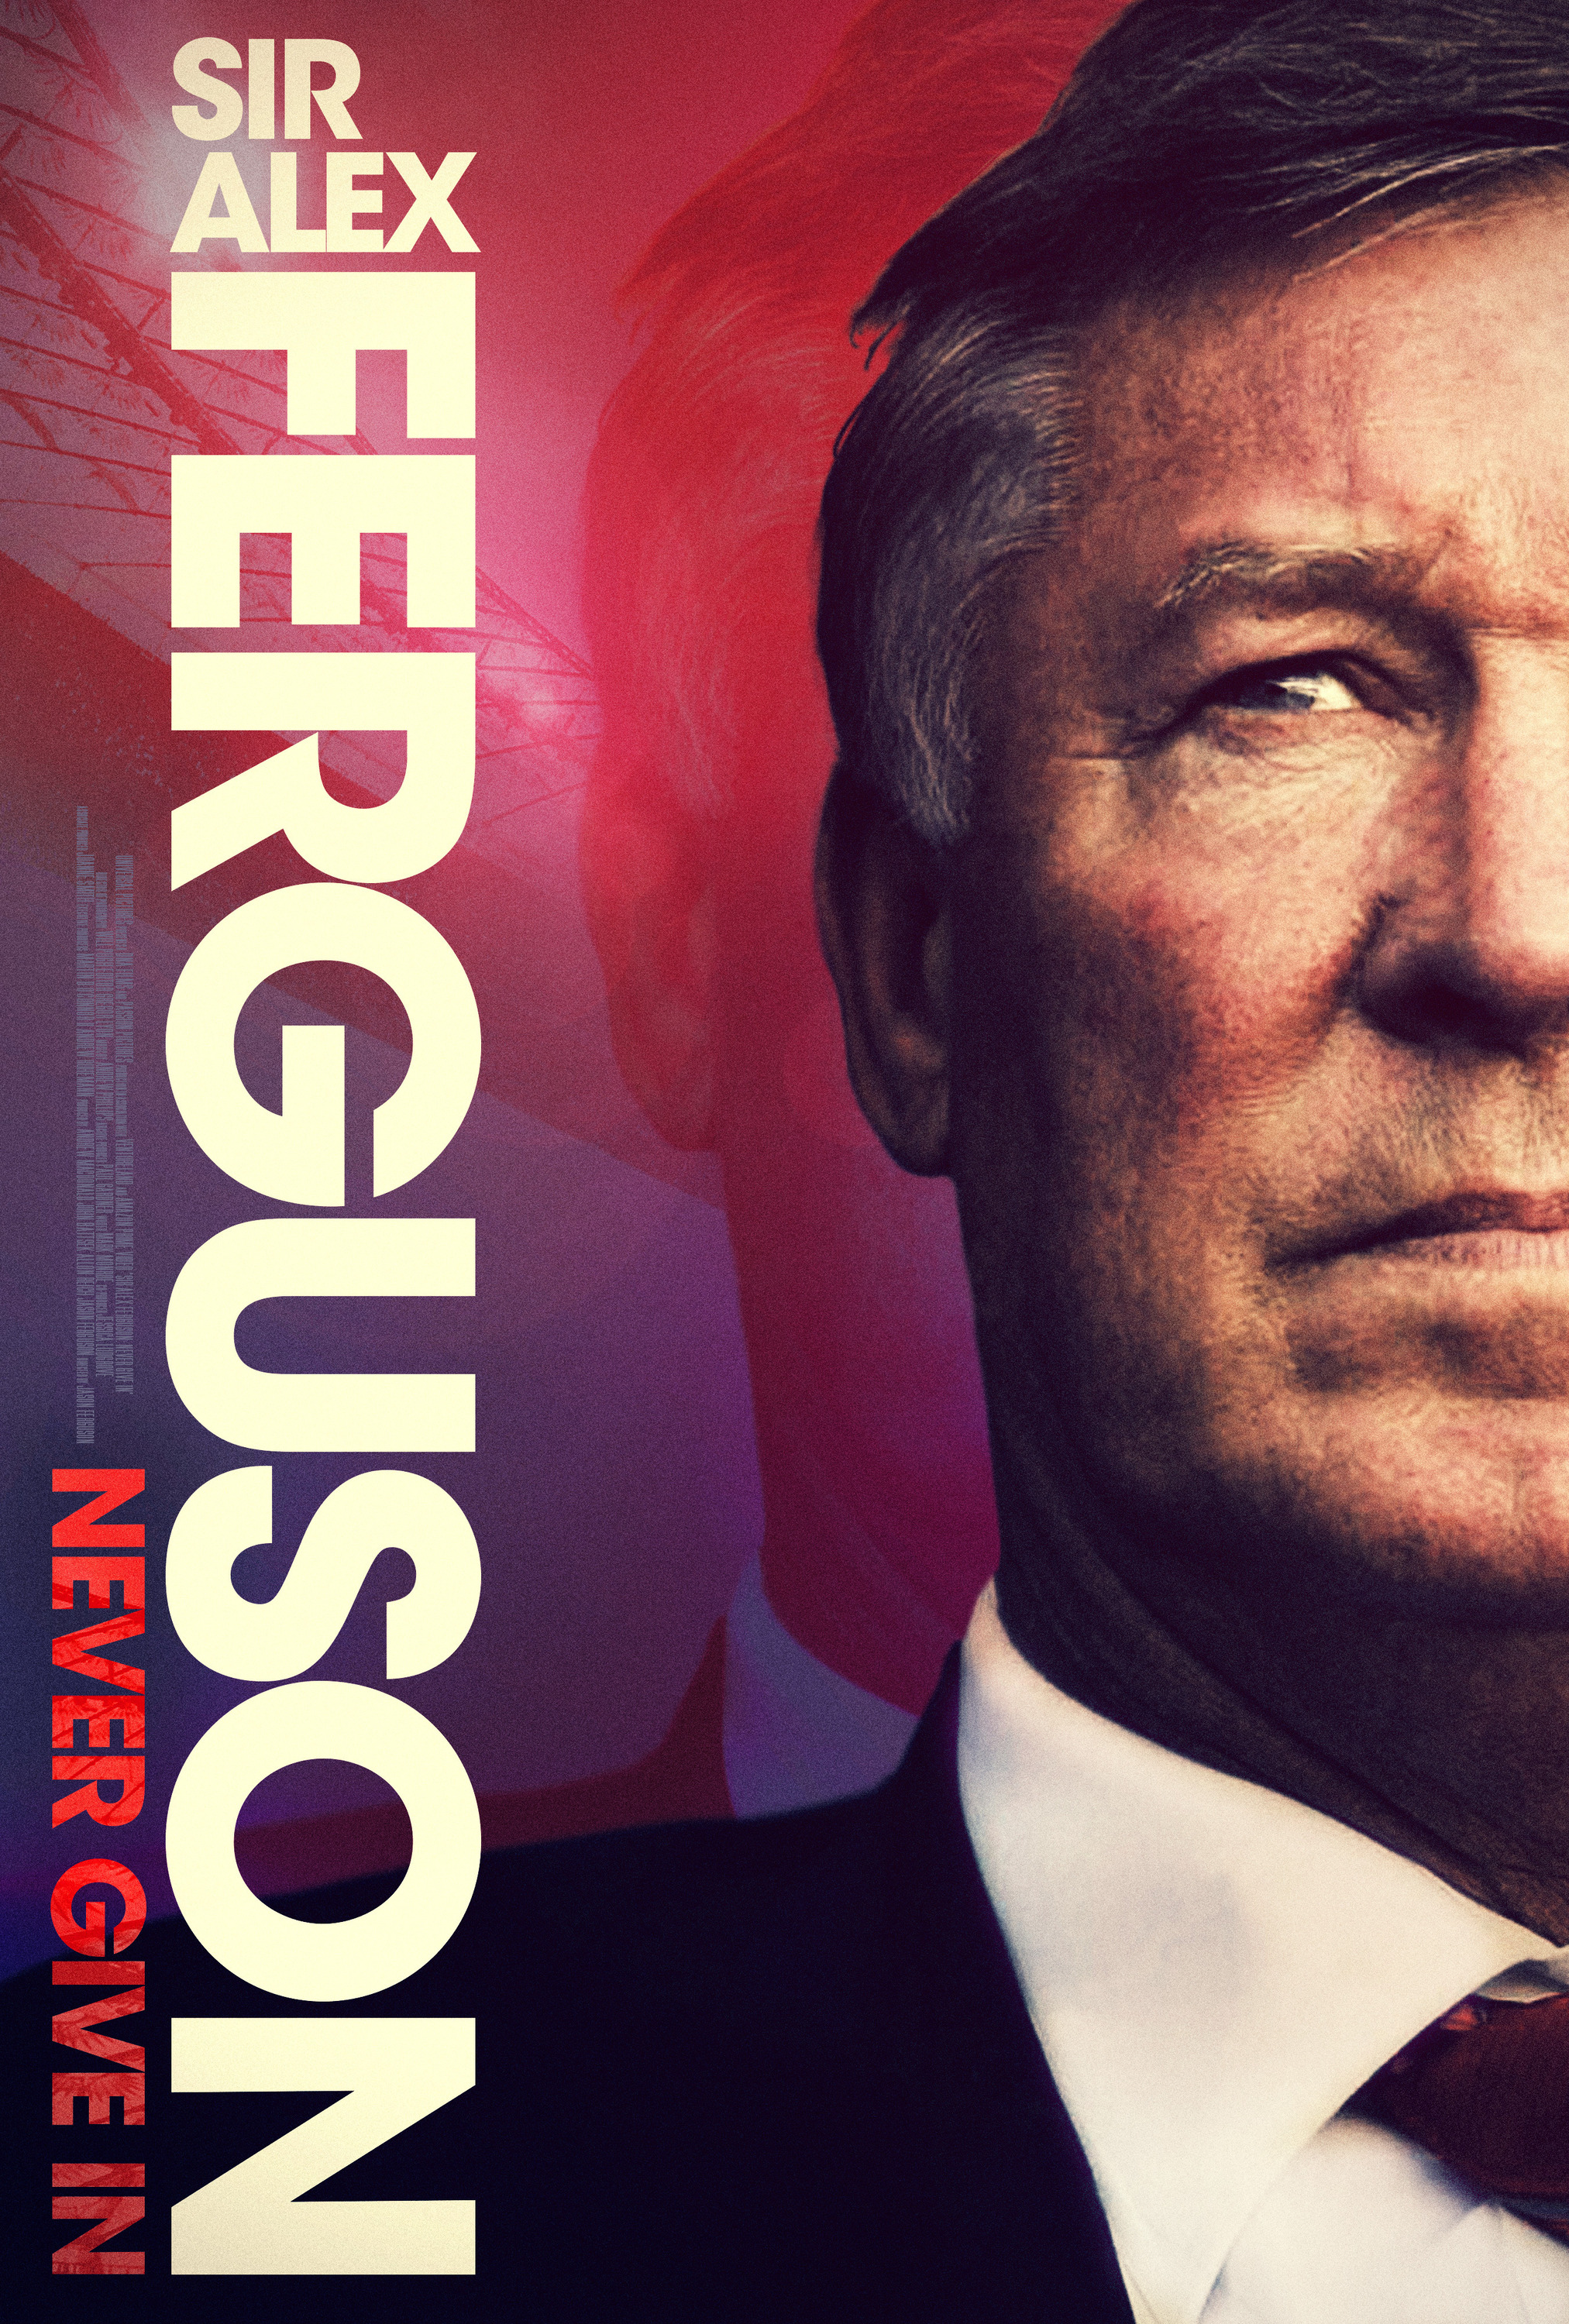 Mega Sized Movie Poster Image for Sir Alex Ferguson: Never Give In 